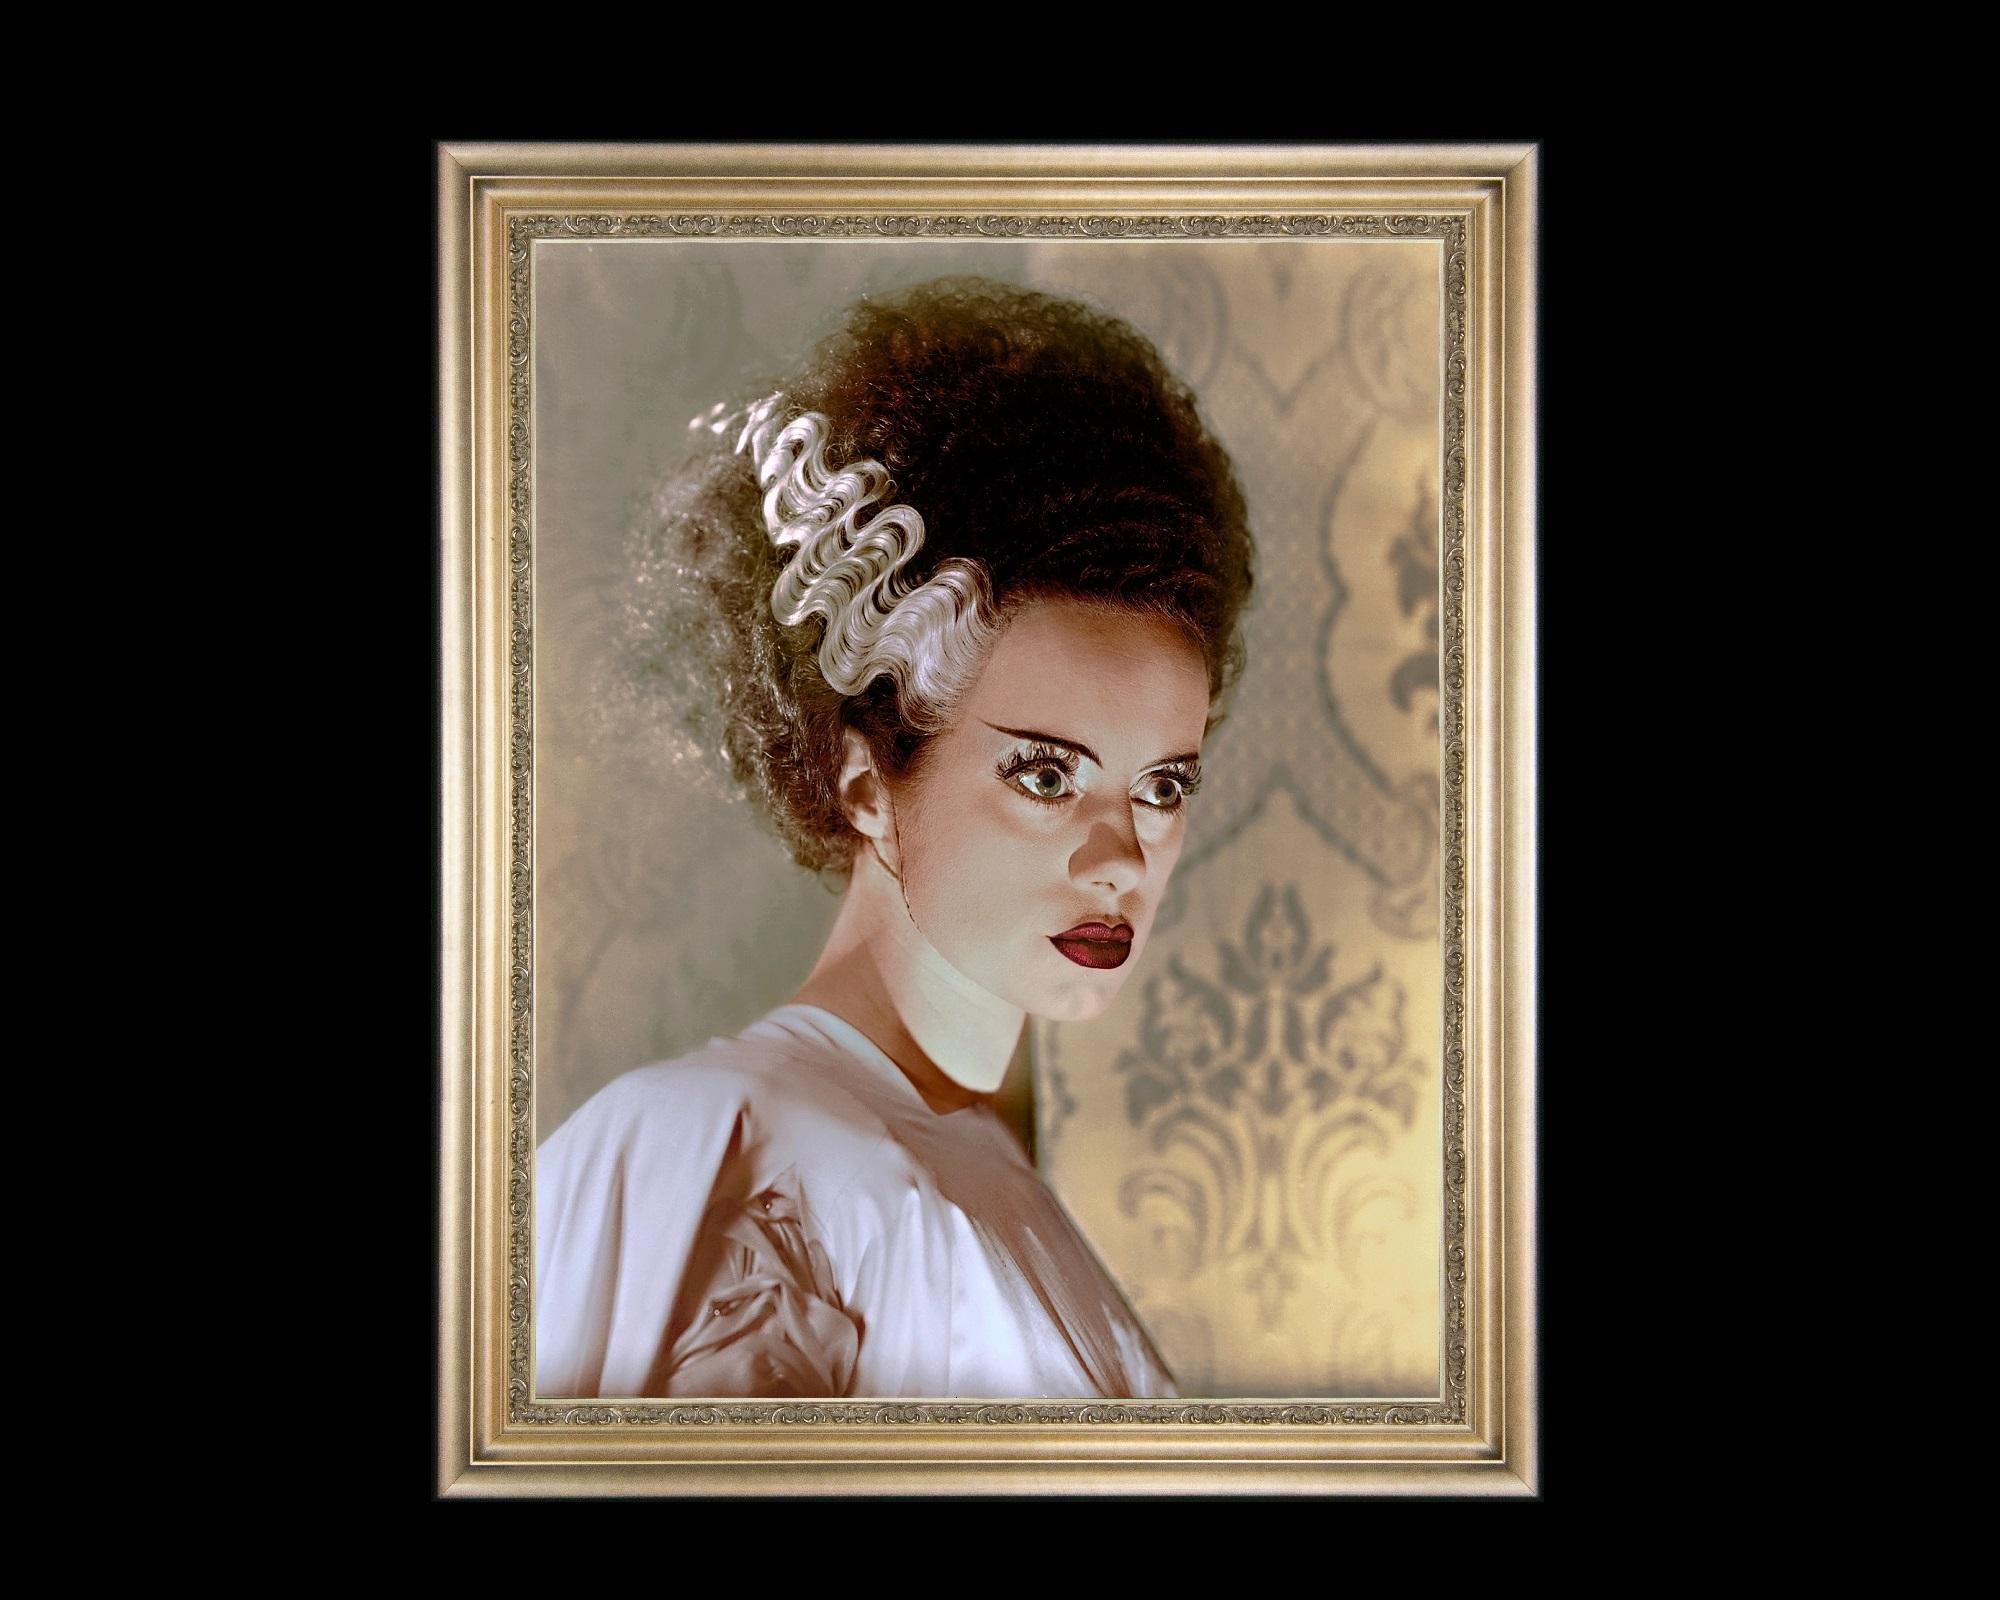 This large Hollywood Regency Oil Painting is a faithful yet nuanced reproduction portrait of 